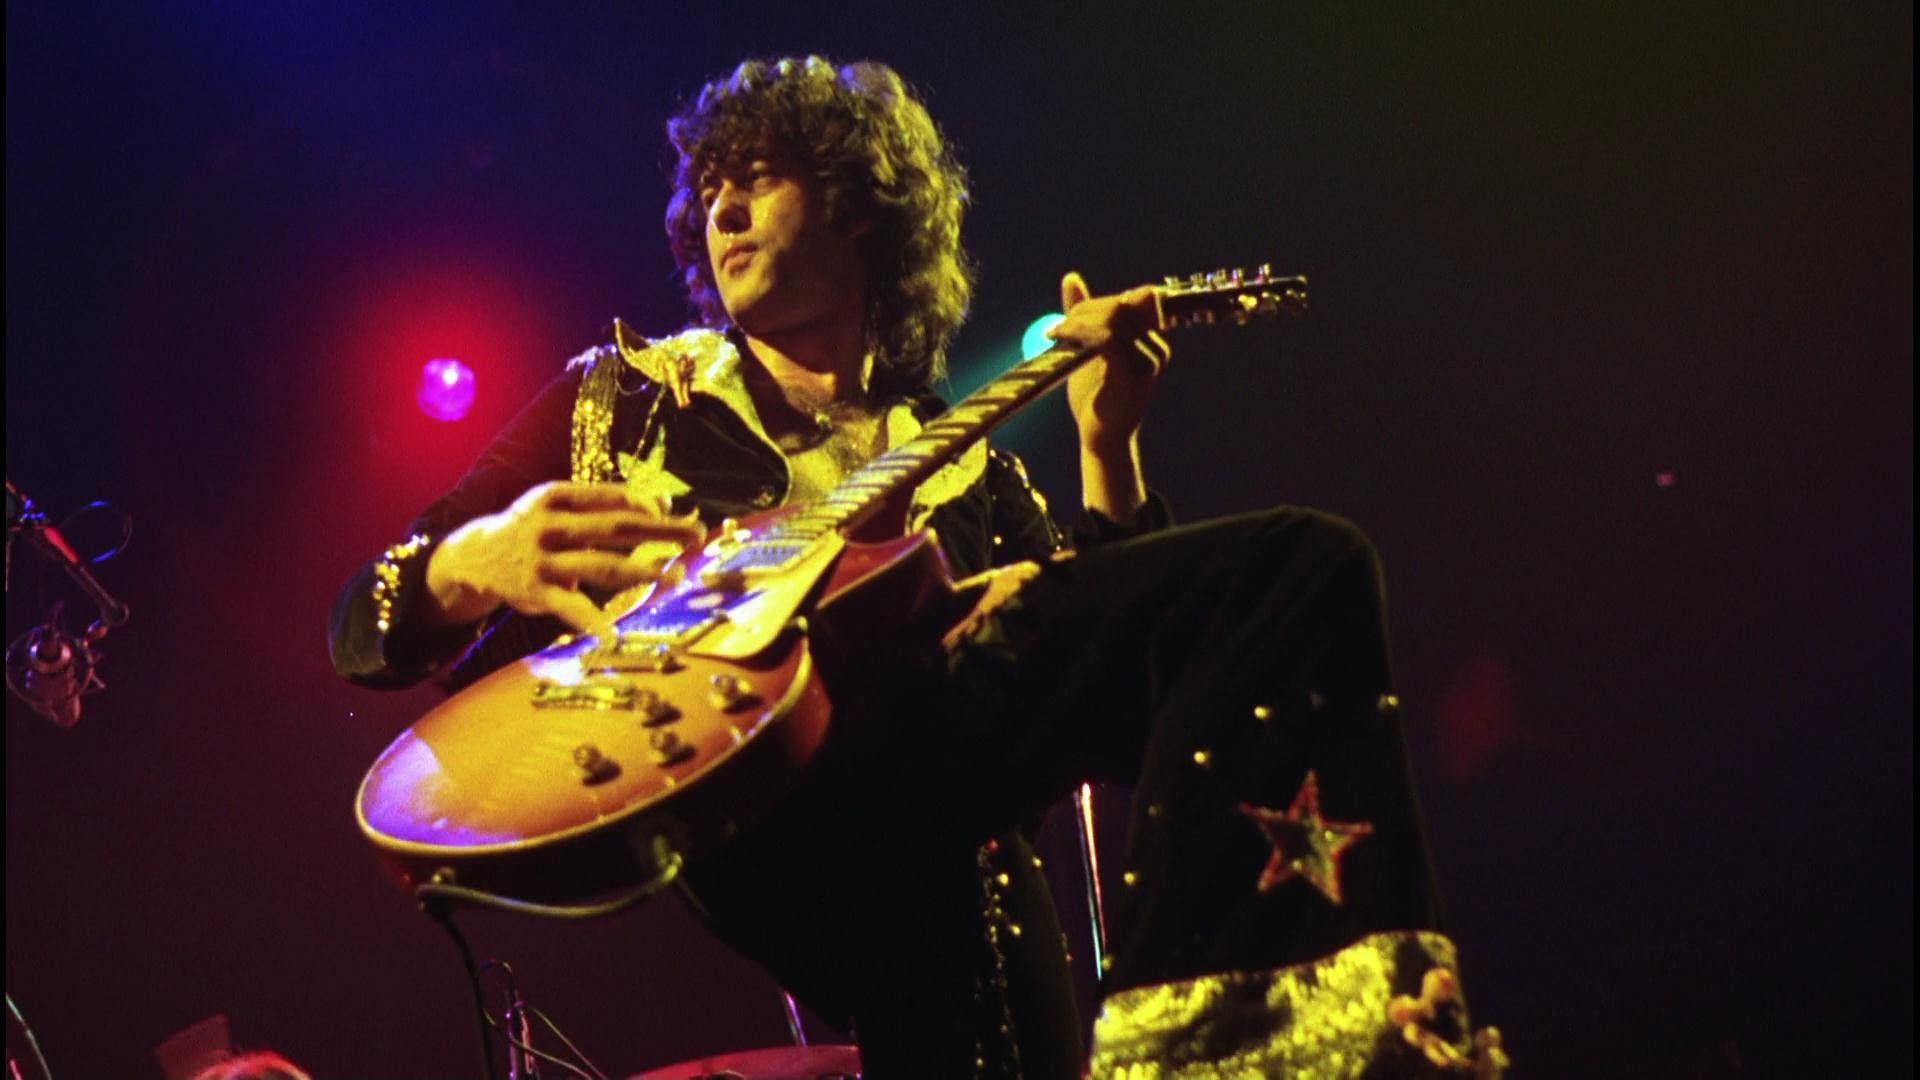 jimmy page by jimmy page torrent